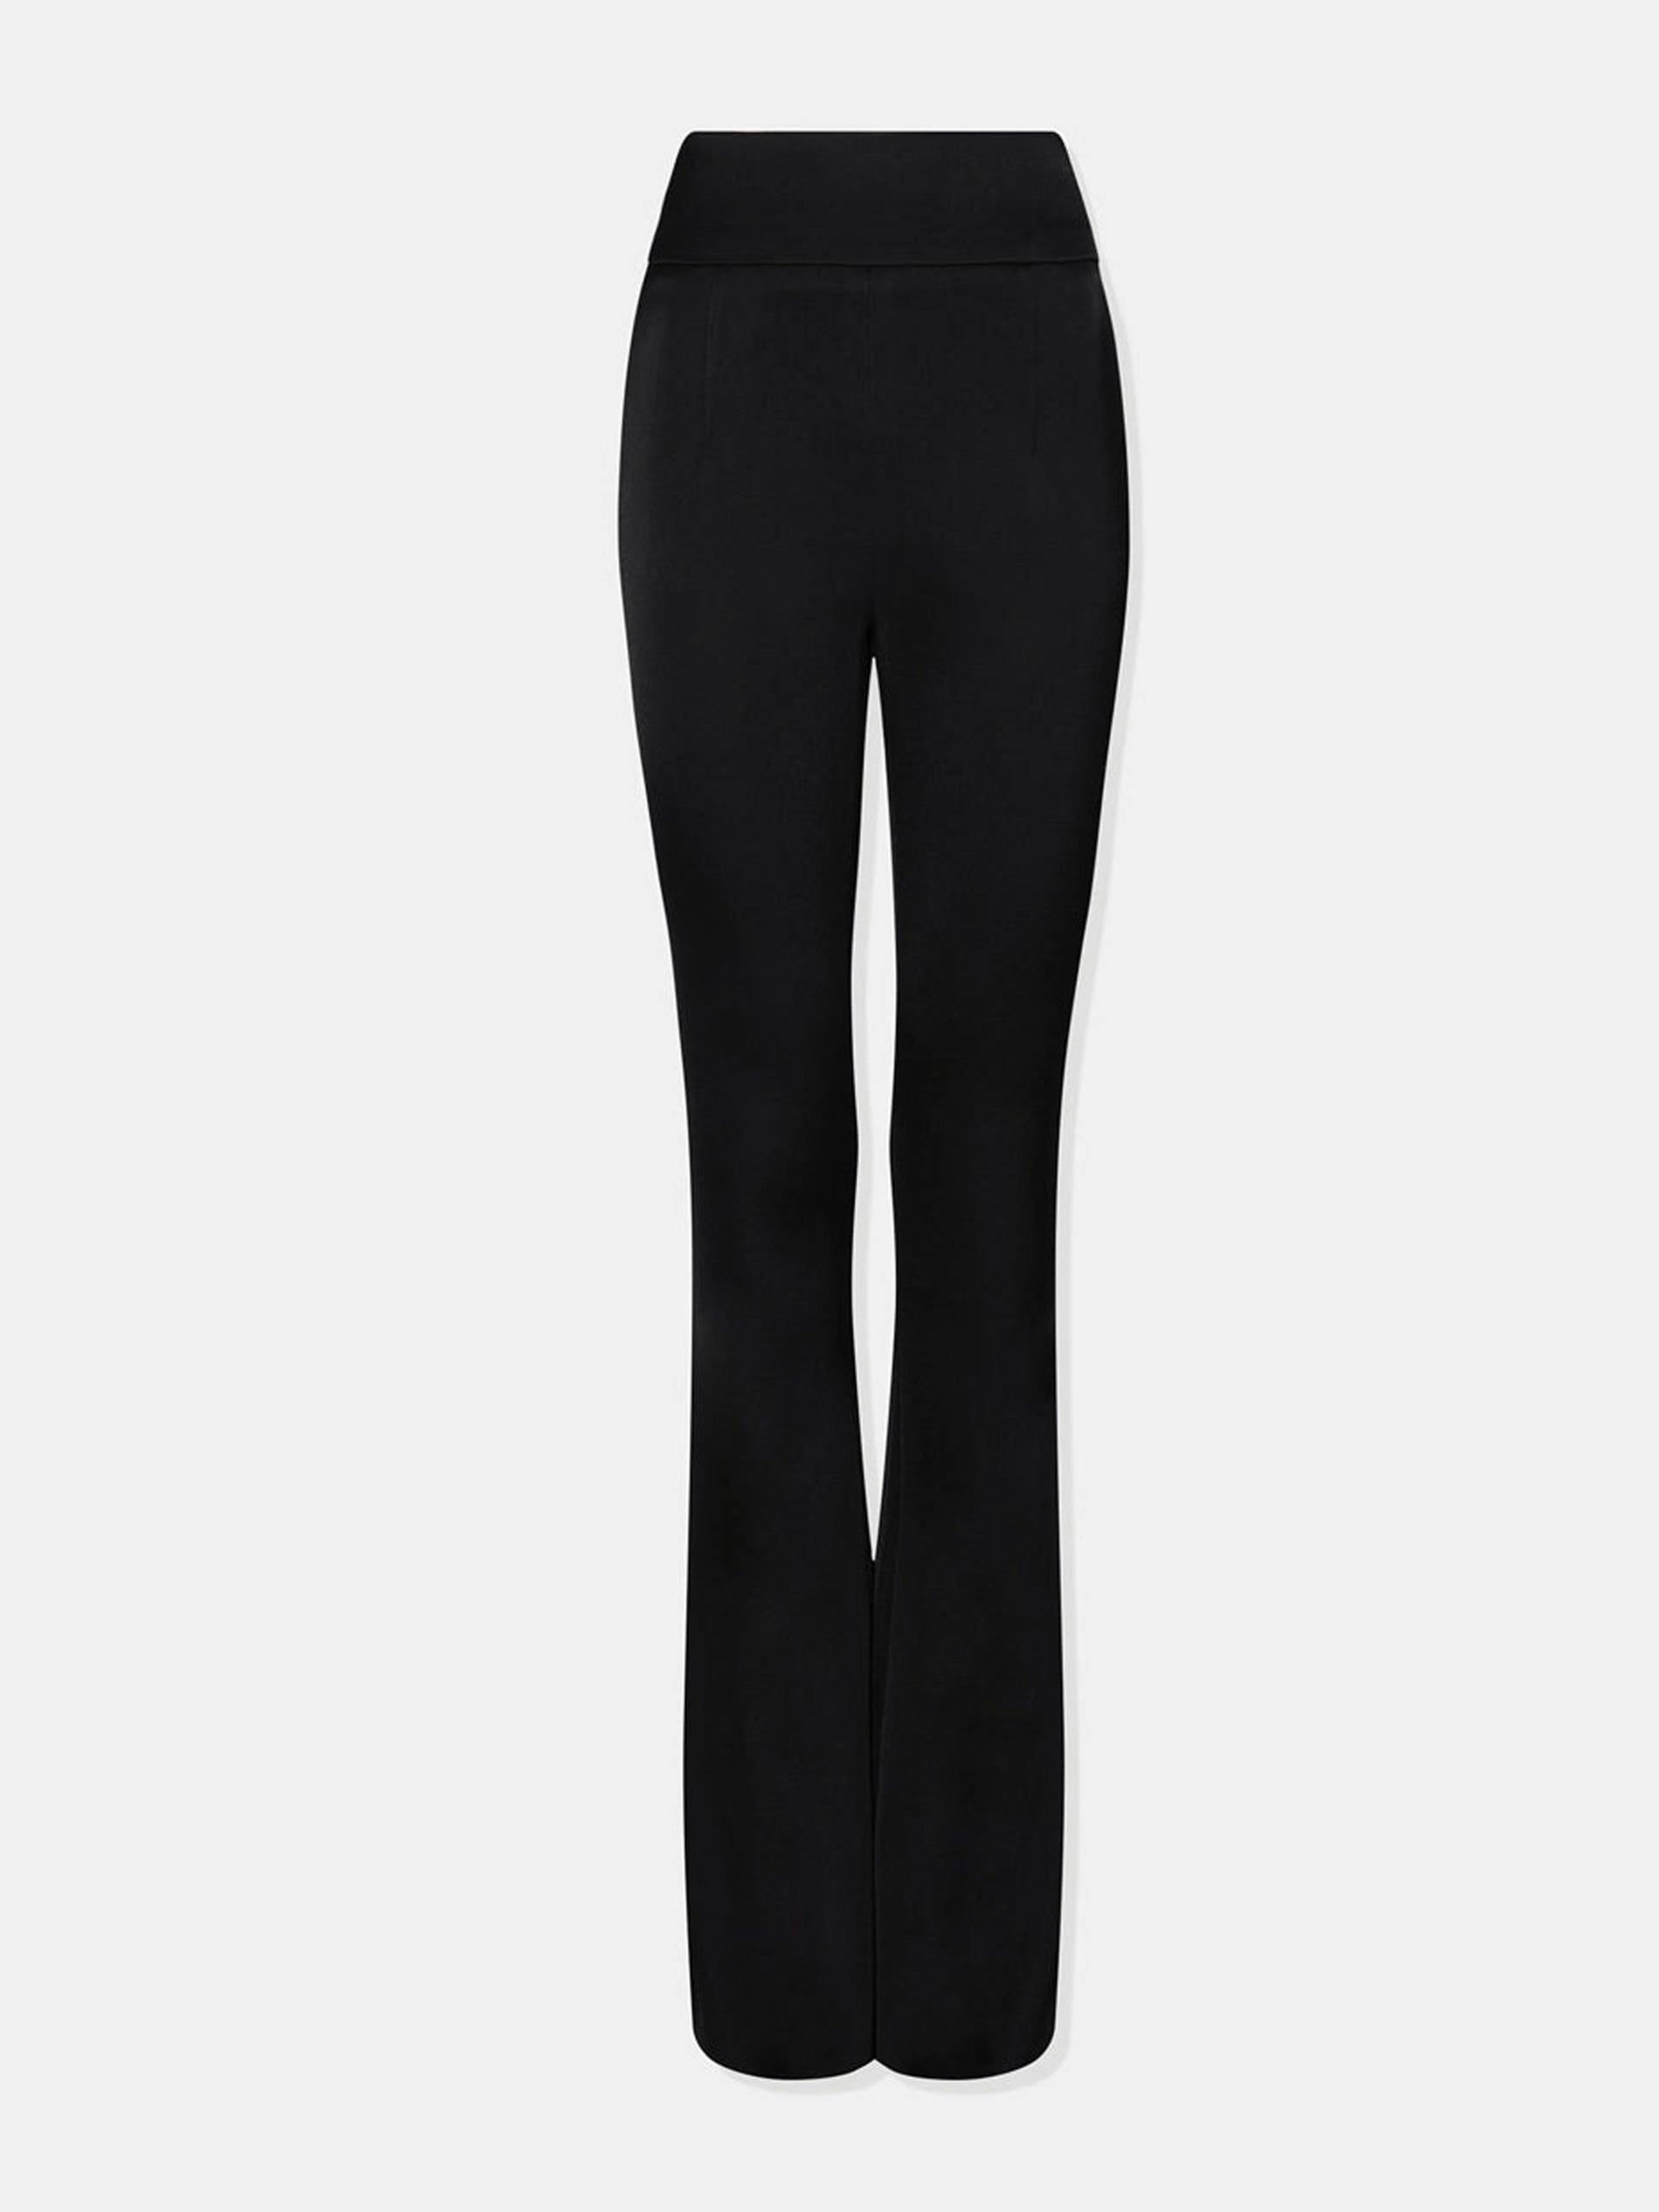 Black sculpted trousers